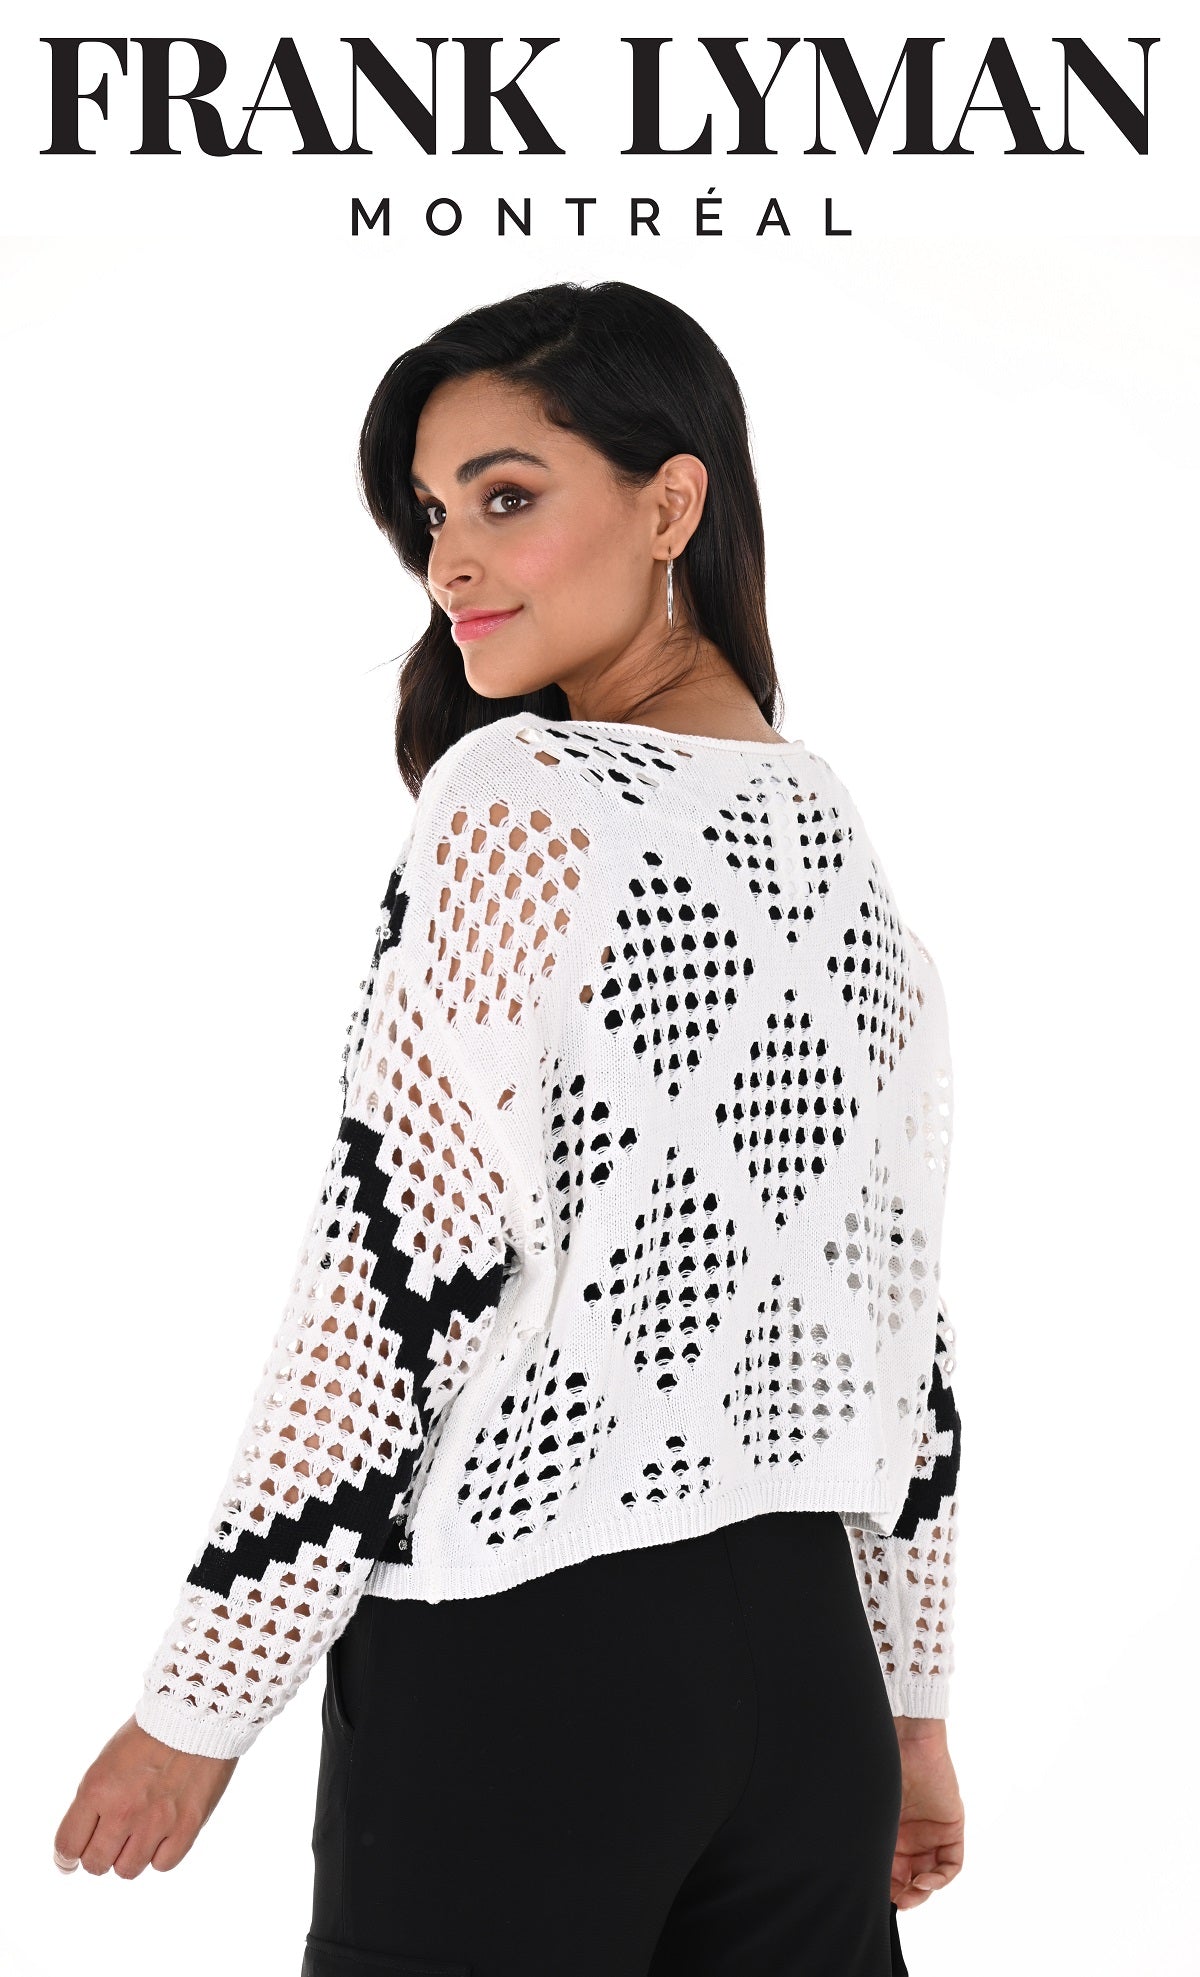 Frank Lyman Montreal Fishnet Sweater With Crystal Stone Detail 